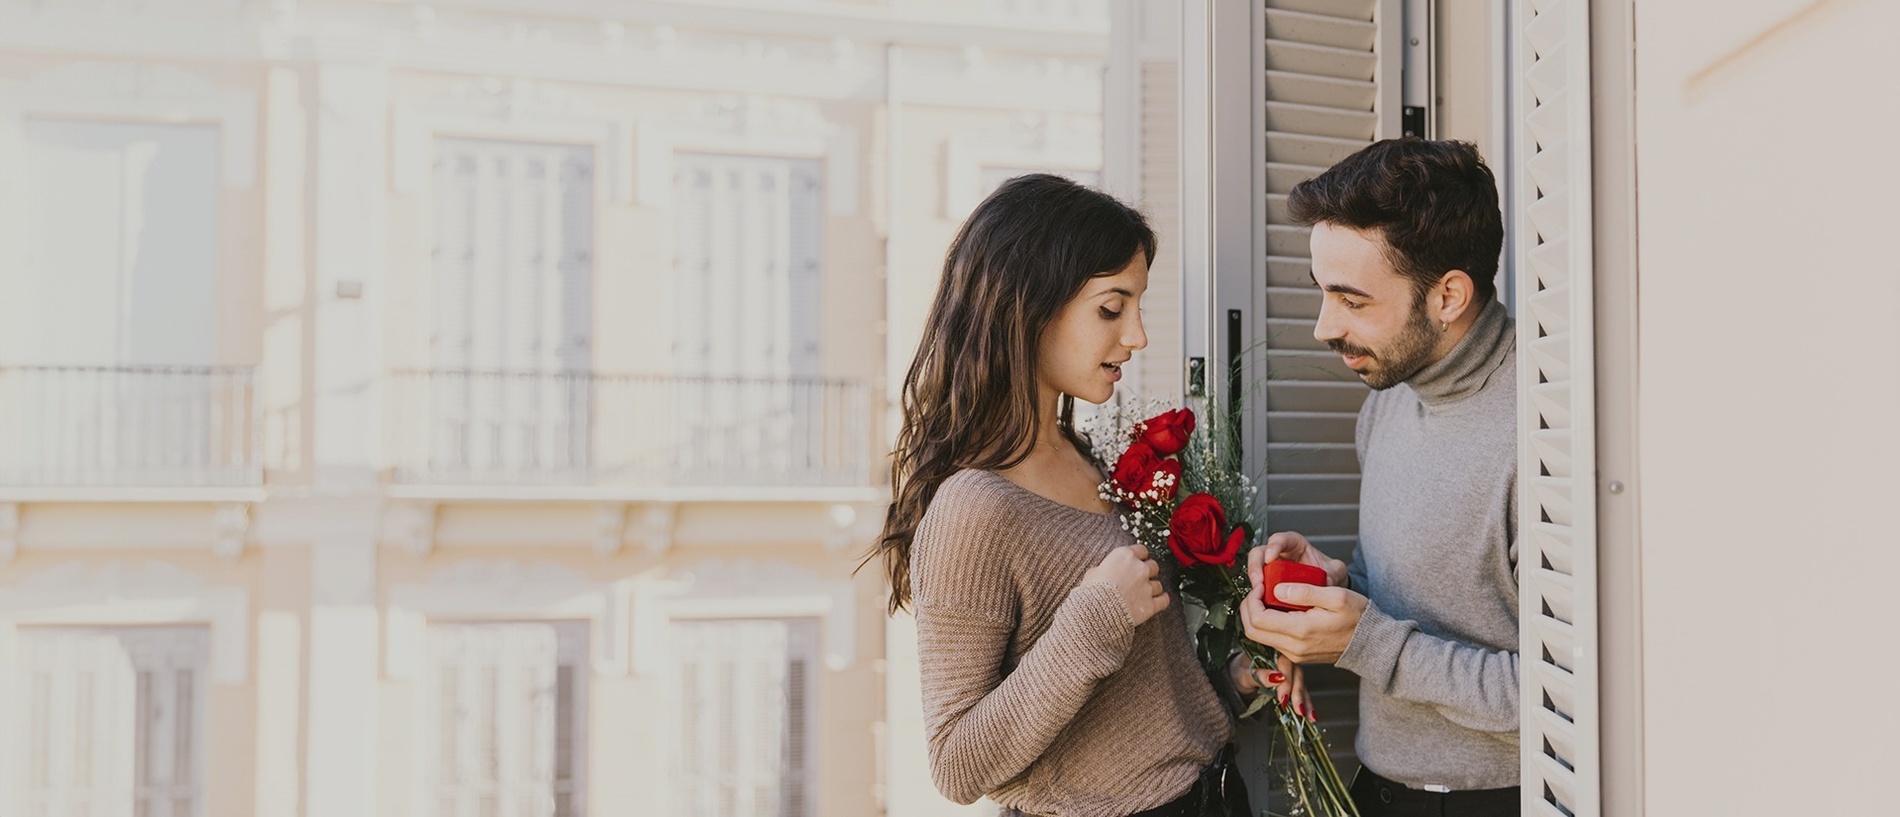 a man is giving a woman a bouquet of red roses